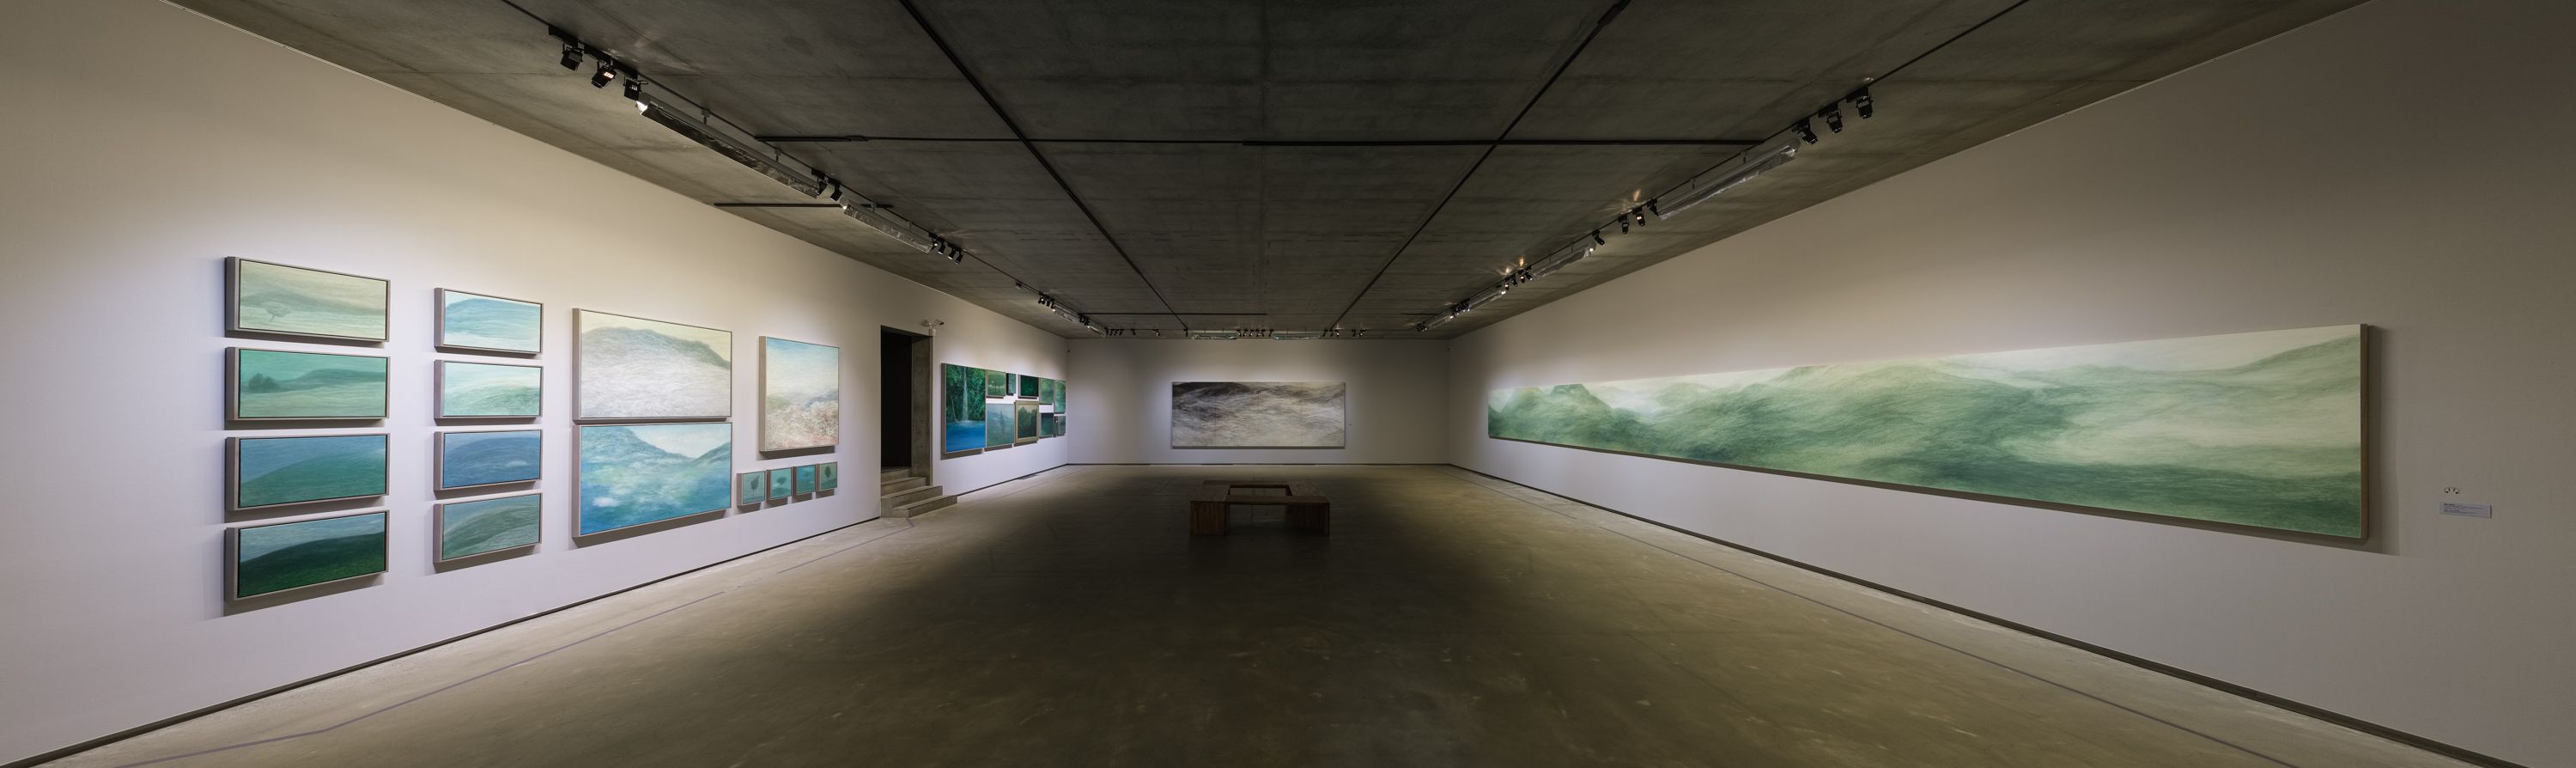 Installation view of 3rd floor gallery - LIN Wei-Hsiang